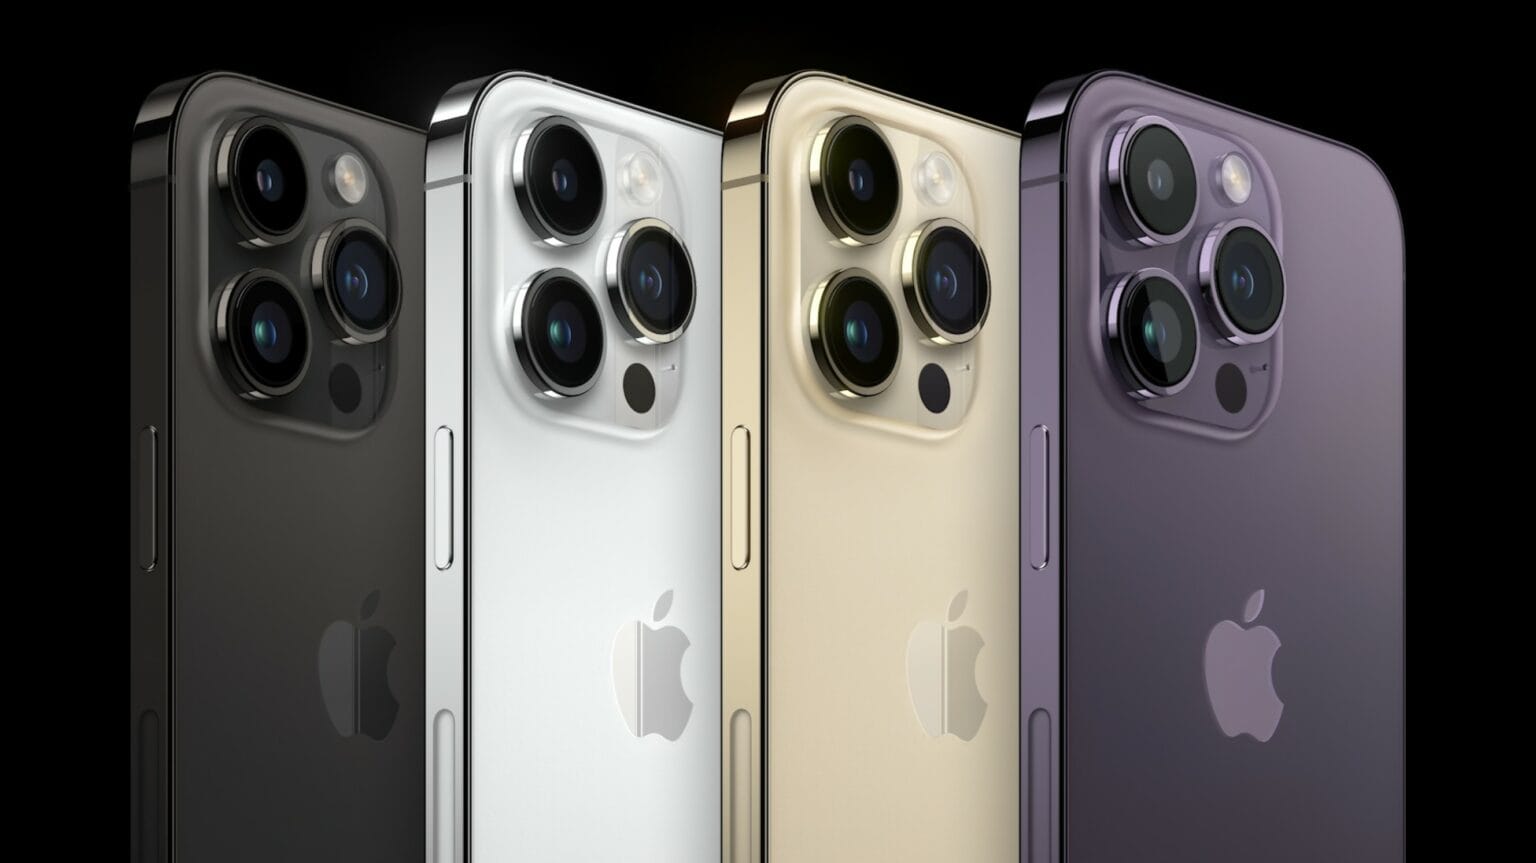 iPhone 14 Pro and Pro Max will come in four understated colors.